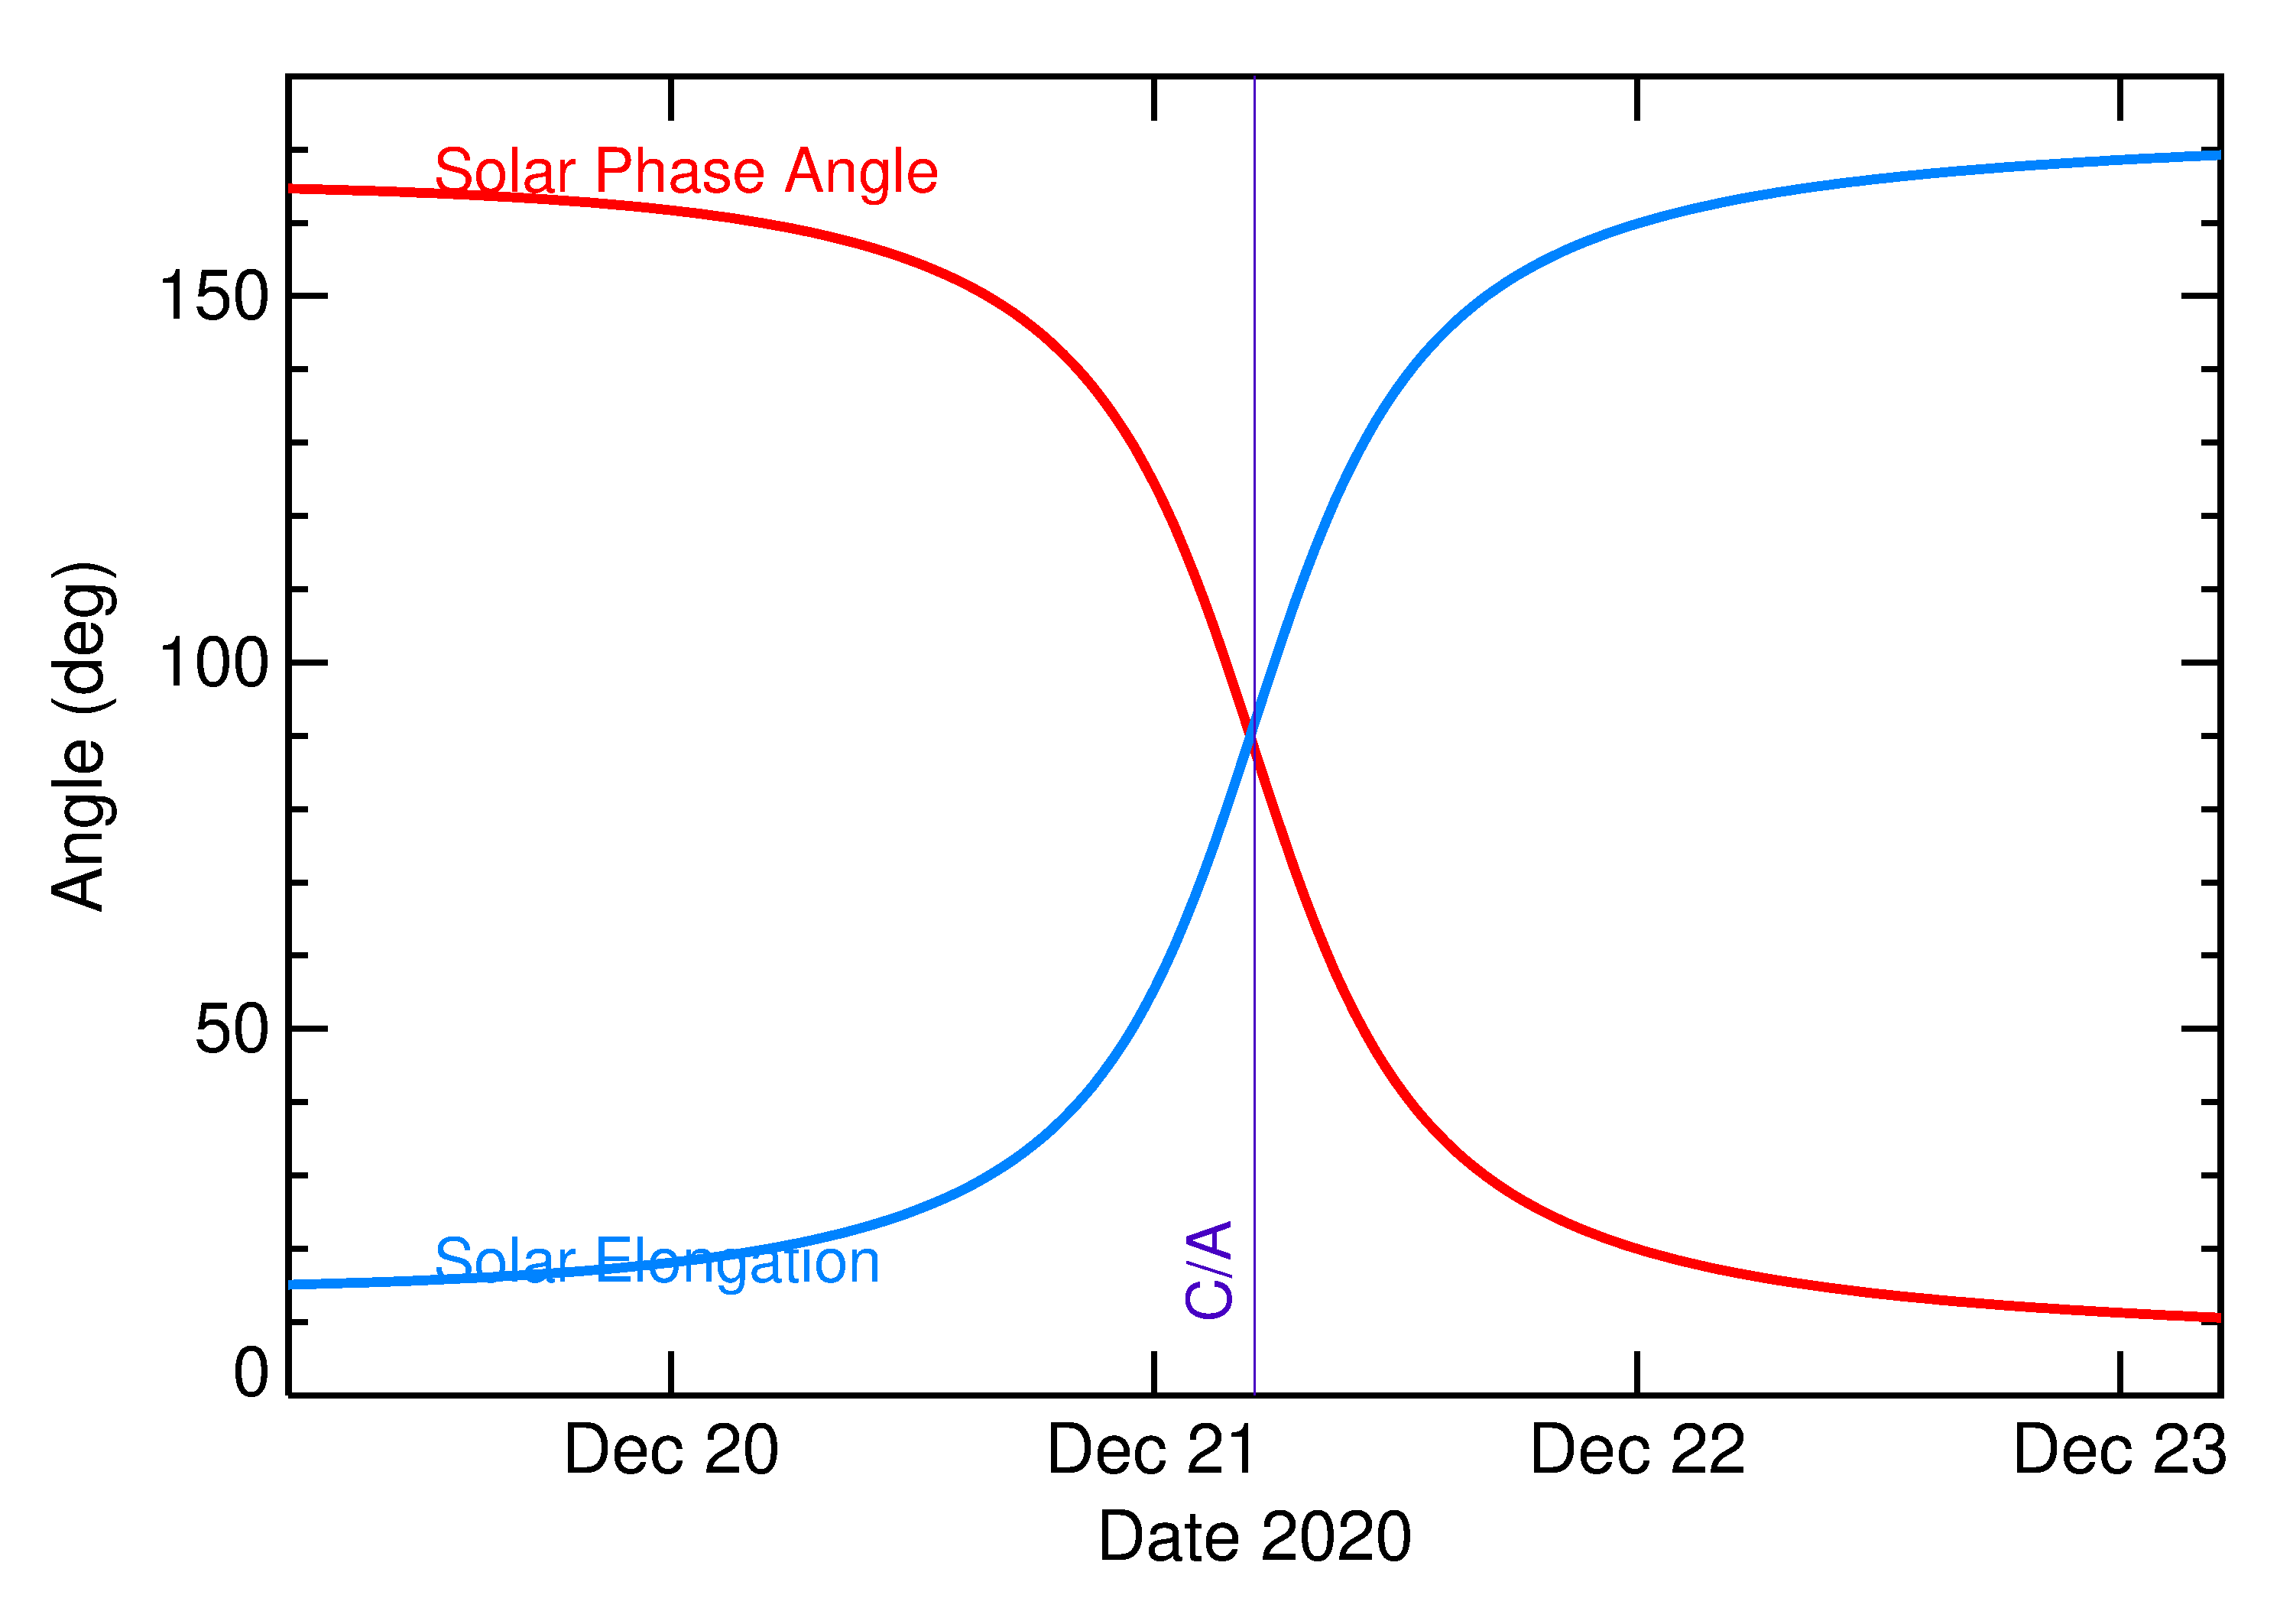 Solar Elongation and Solar Phase Angle of 2020 YJ2 in the days around closest approach